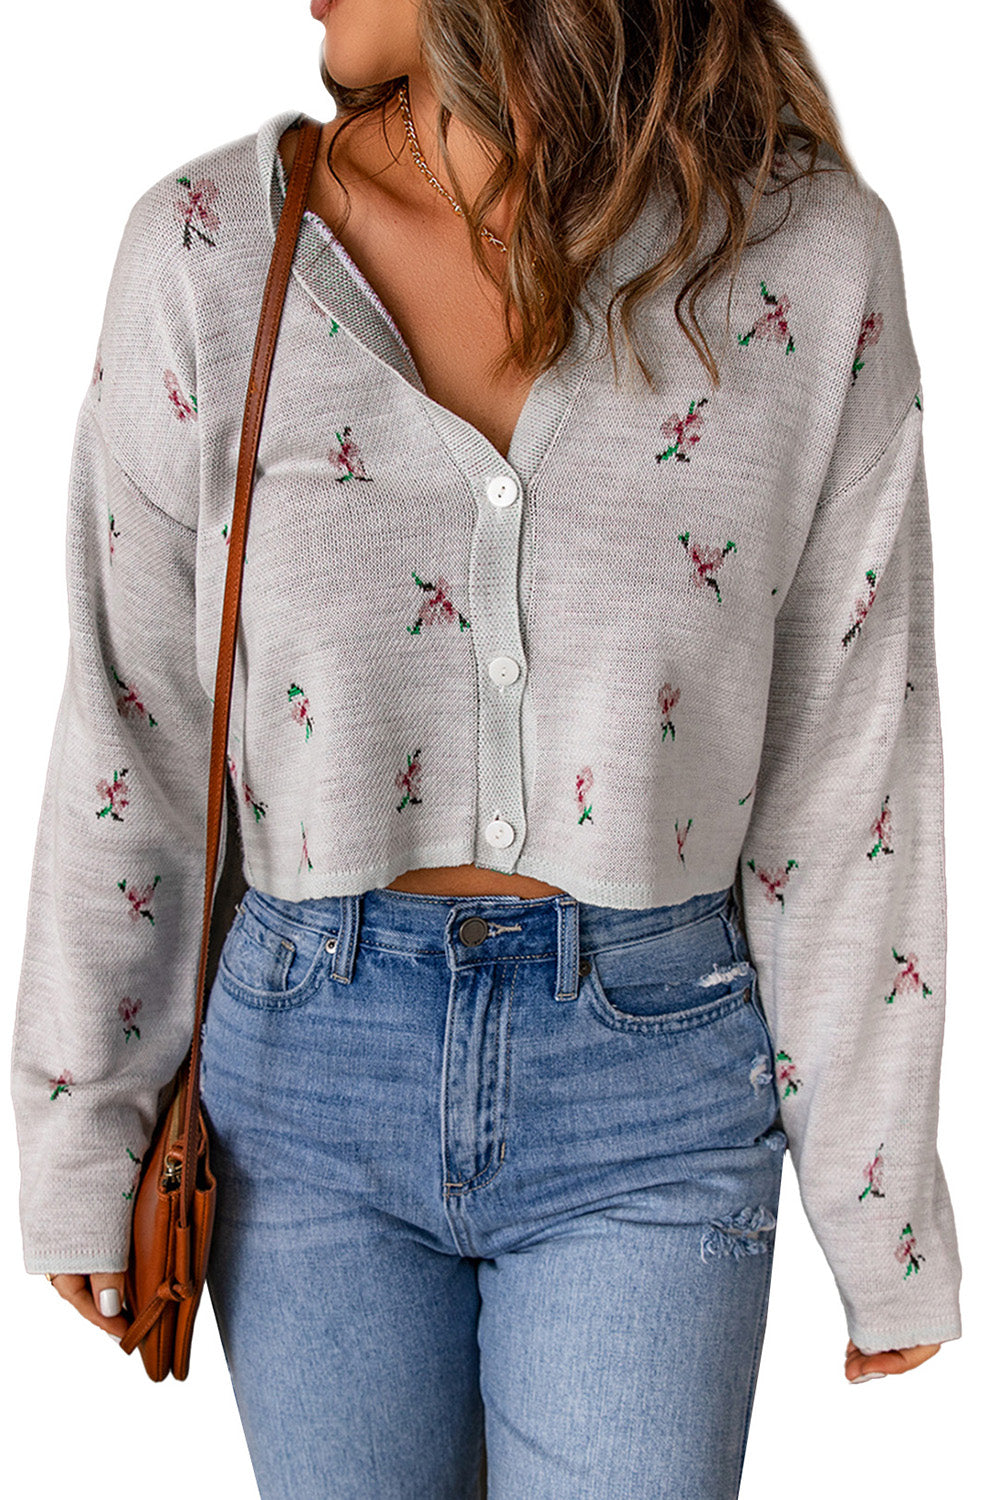 Floral Button Down Cropped Cardigan - Women’s Clothing & Accessories - Shirts & Tops - 7 - 2024